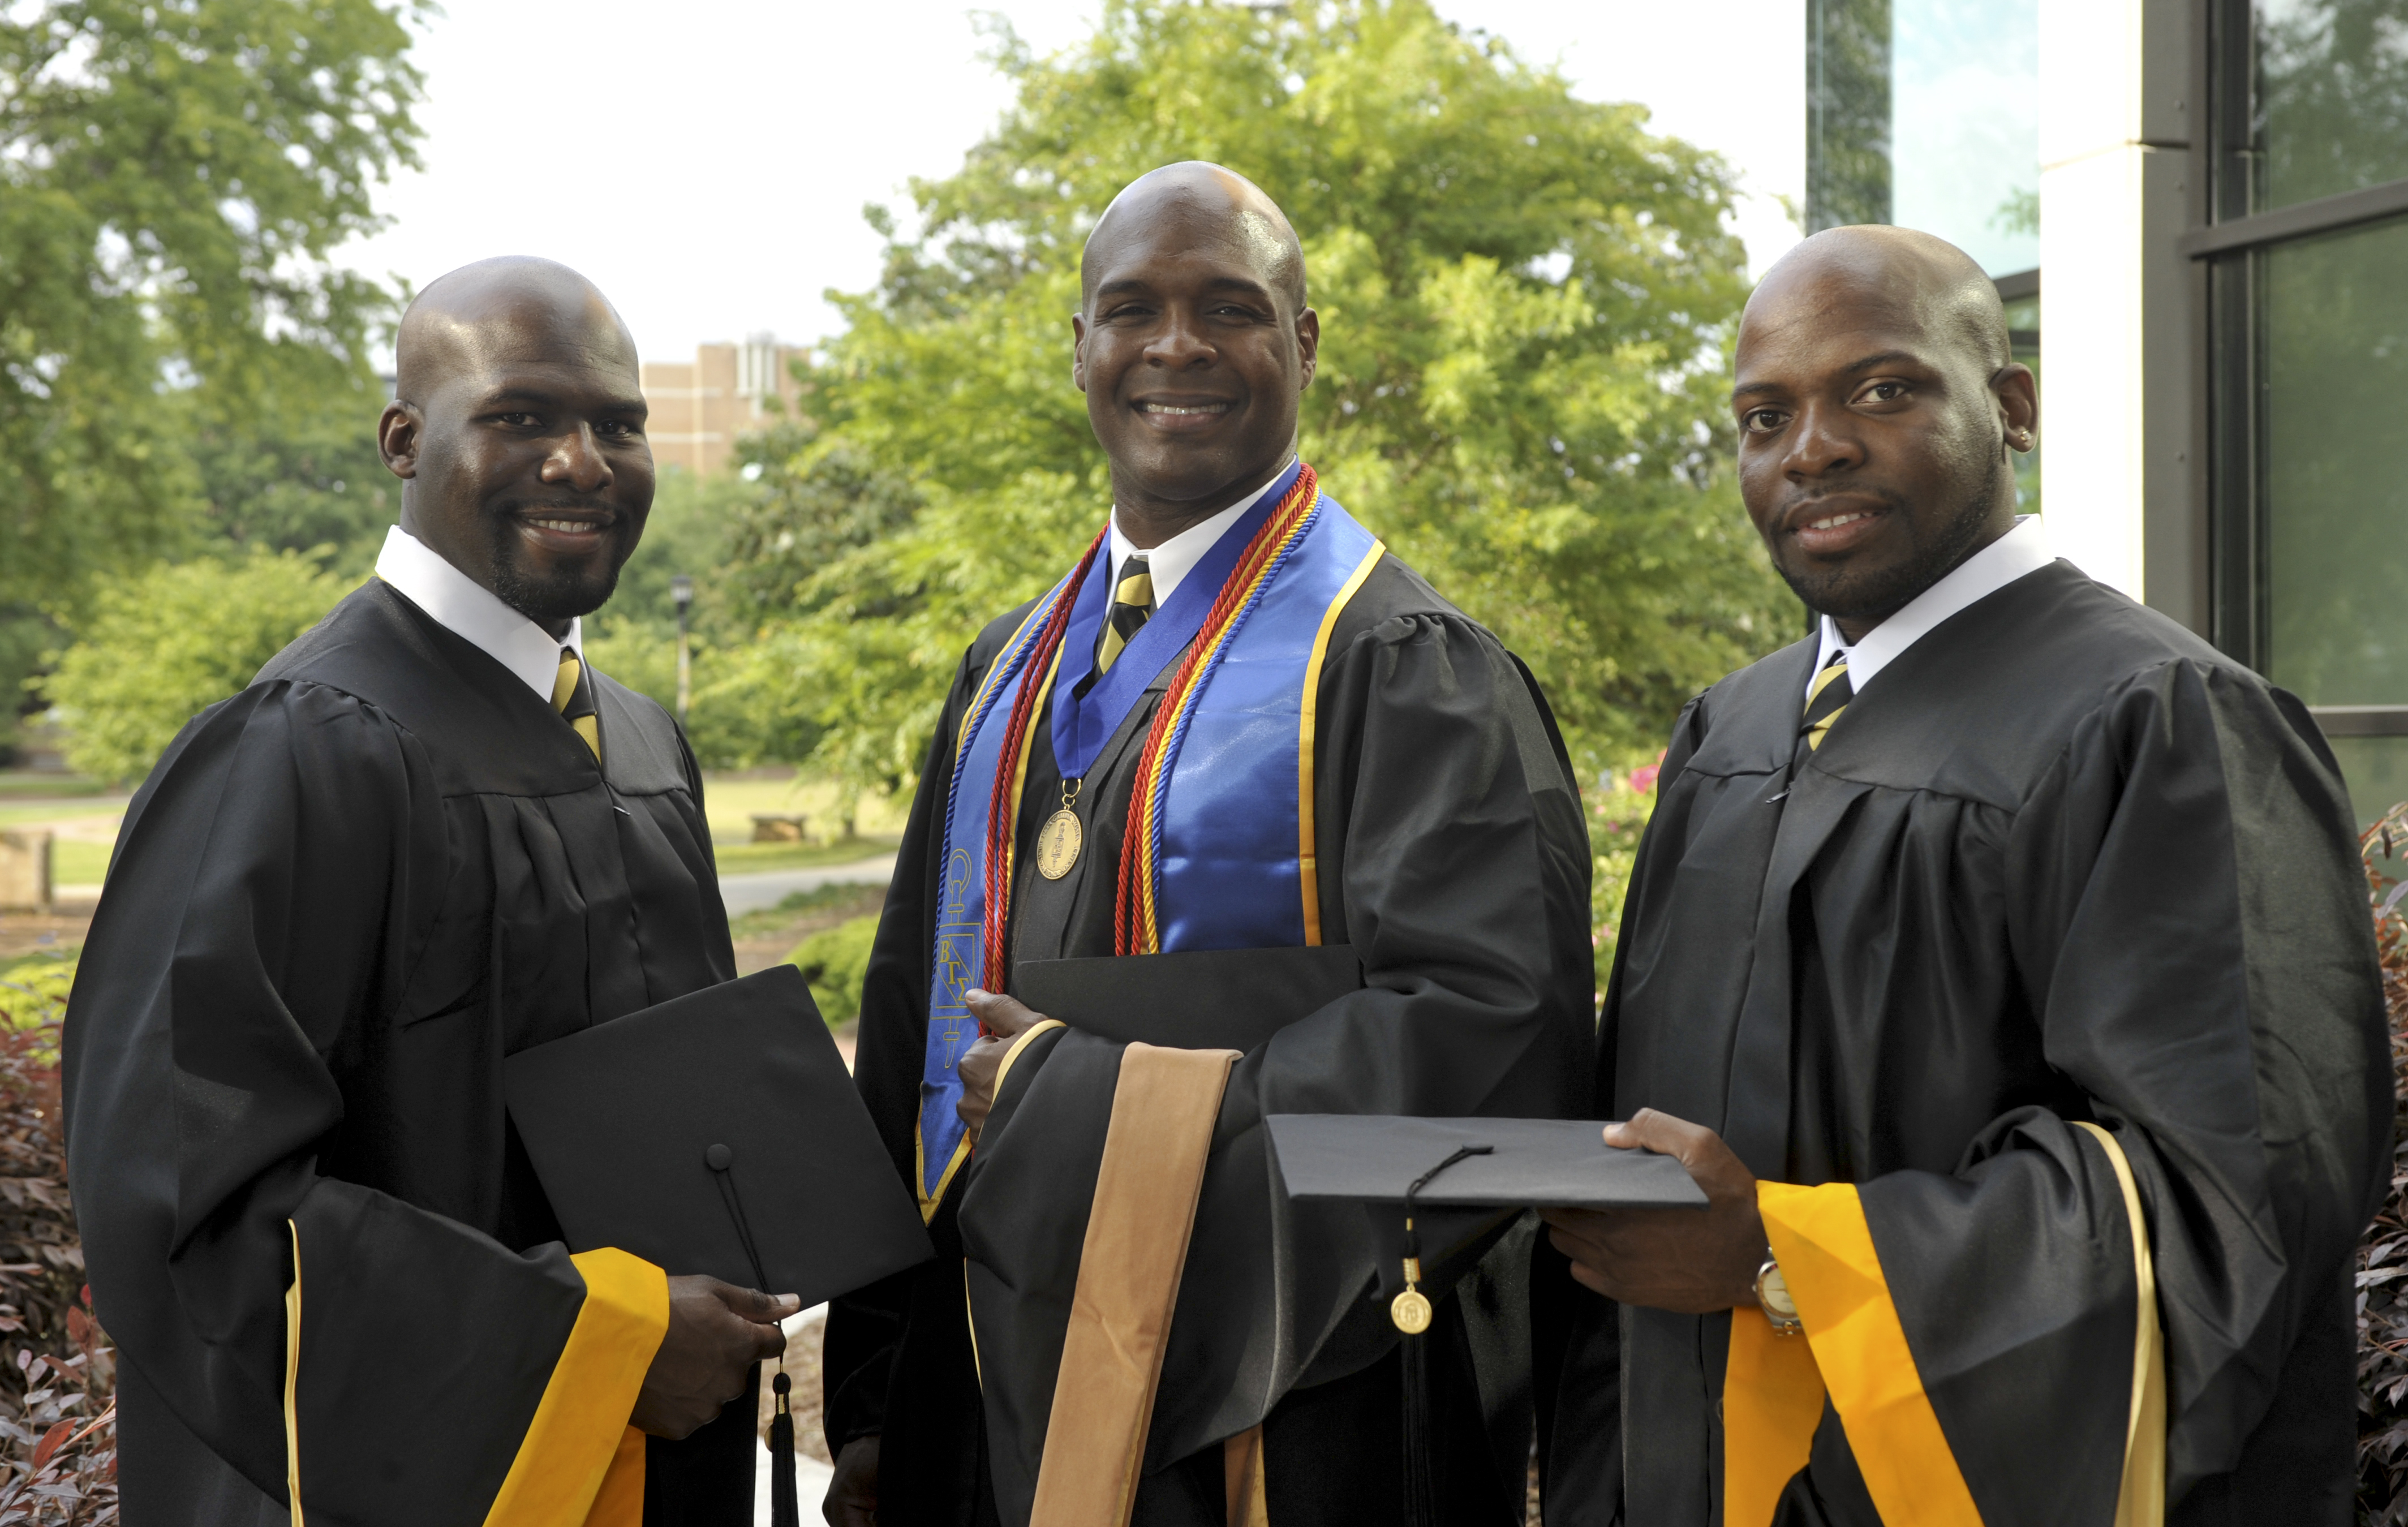 Three Brothers Earn Master's Degrees at Same University on the Same Day